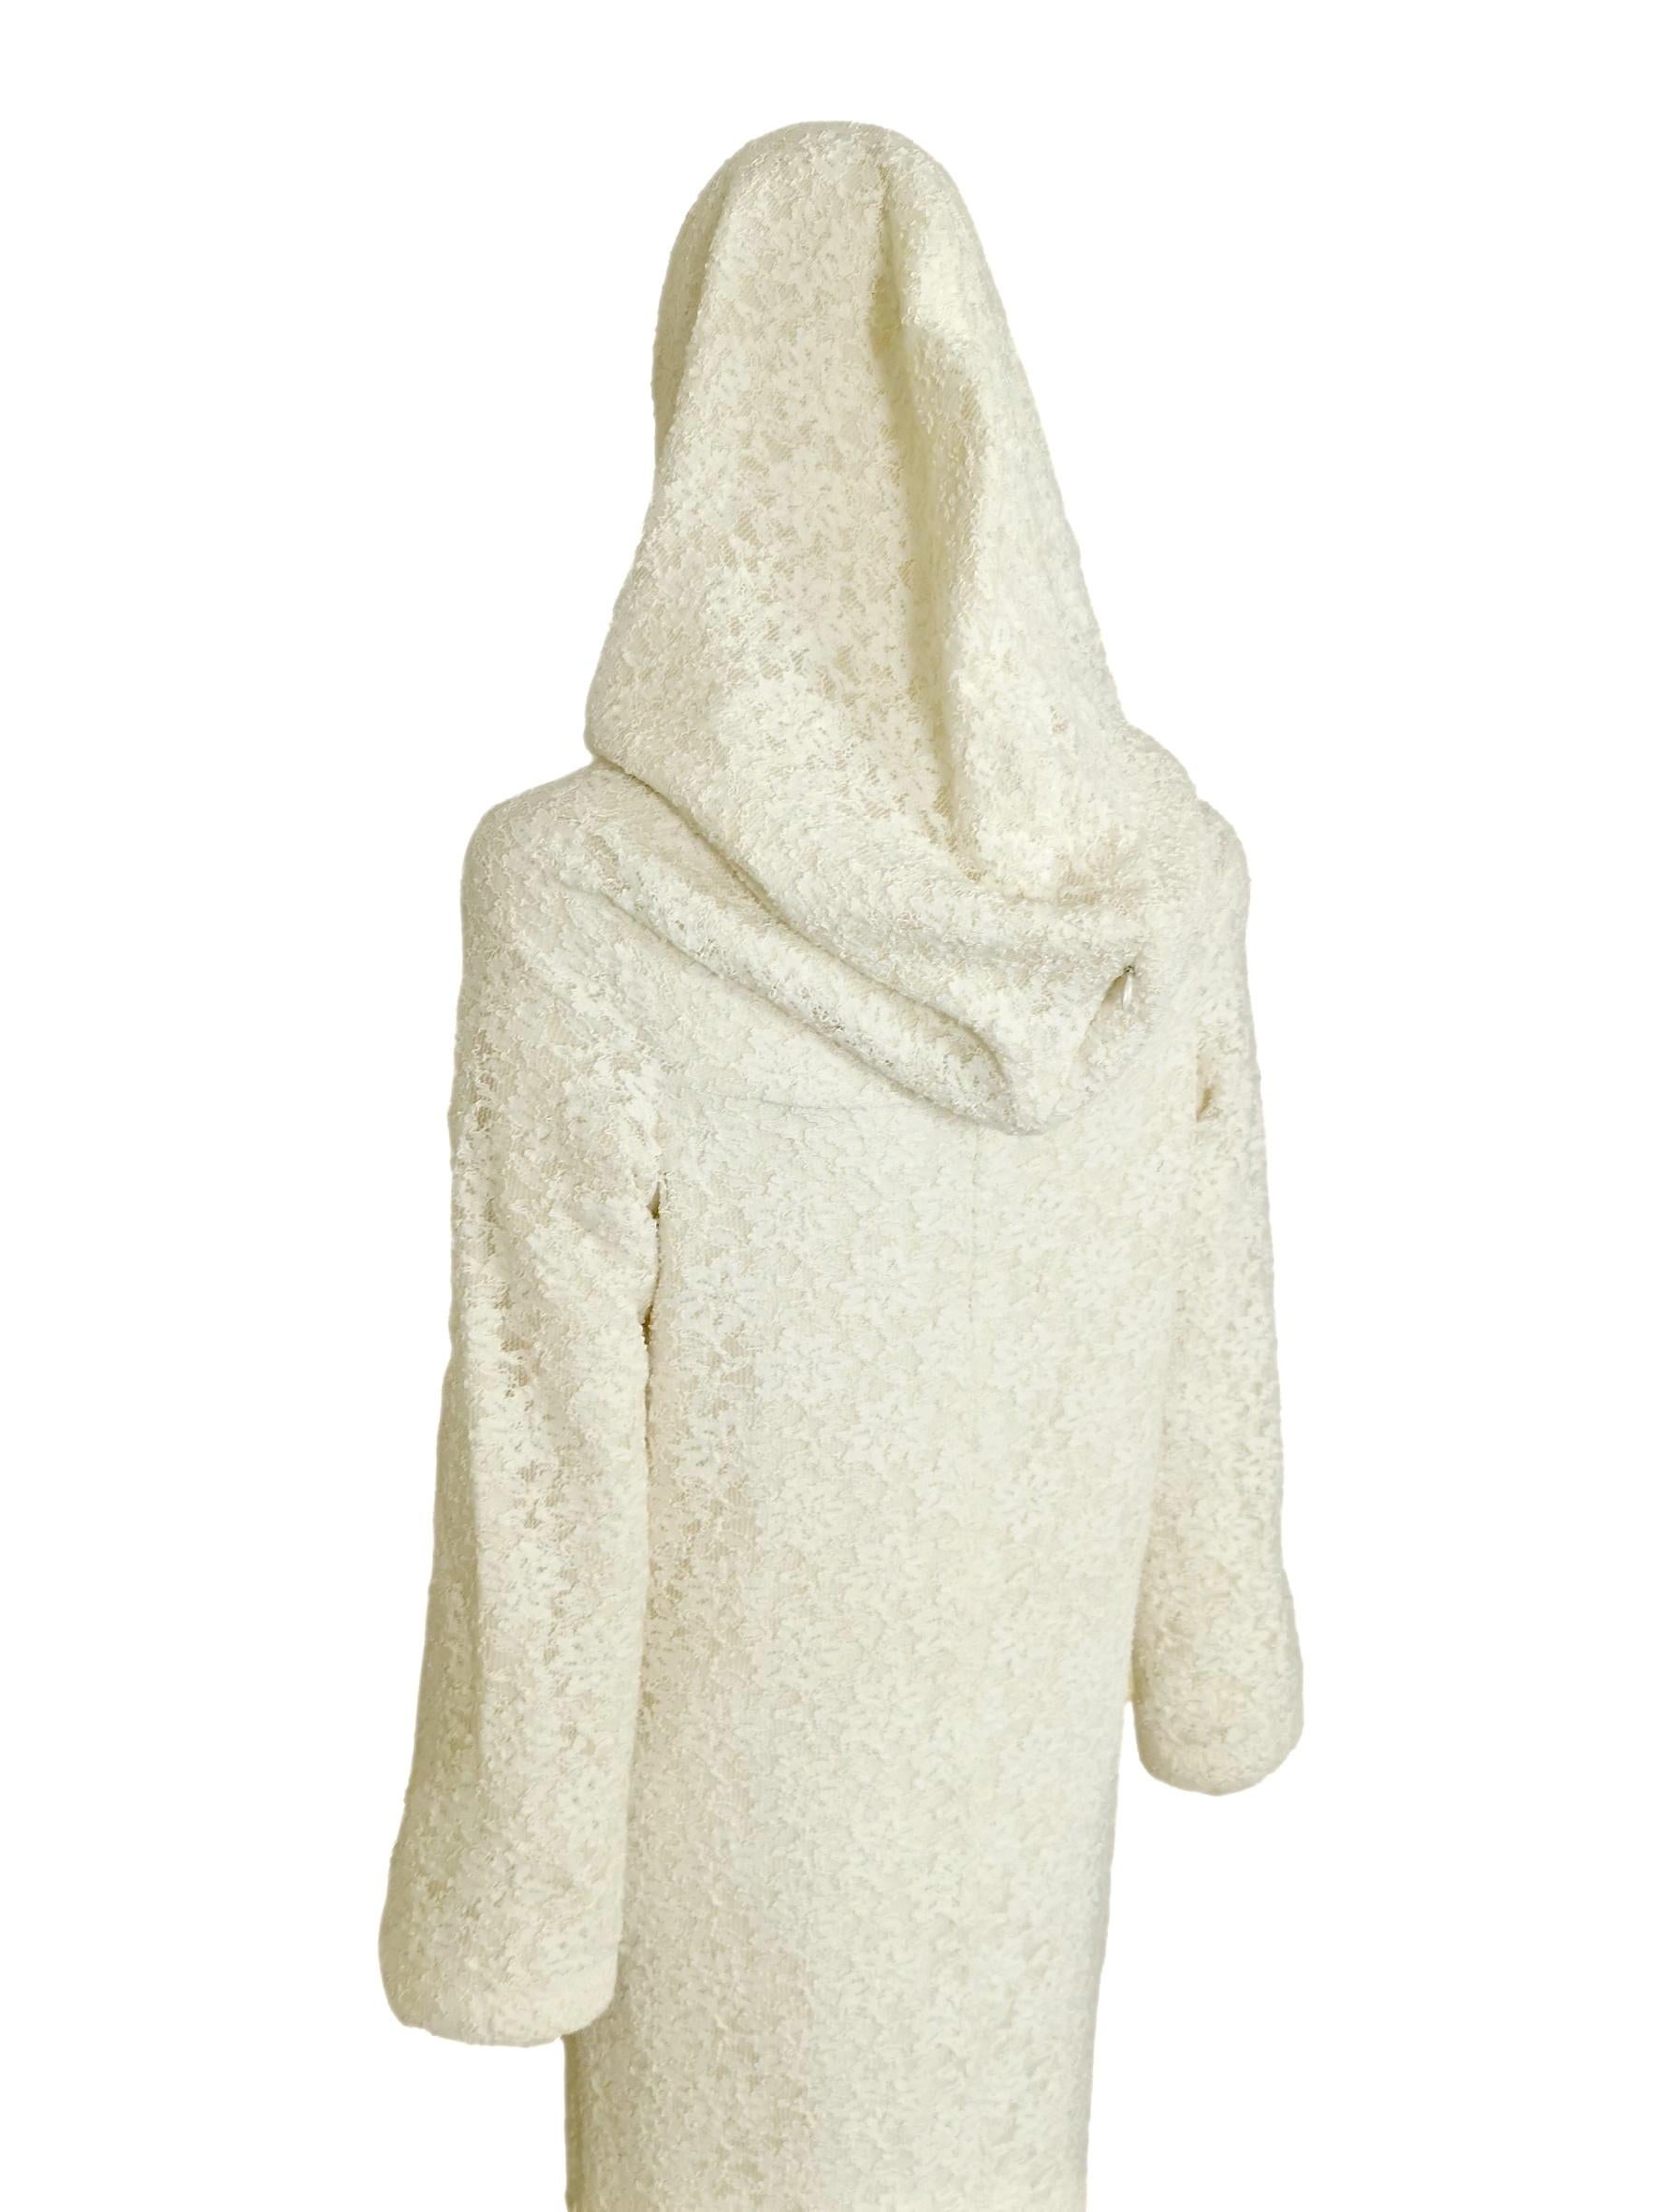 Comme des Garcons AD 2011
White Drama

Cowl Hooded Dress

Size XS
30 Inch Chest